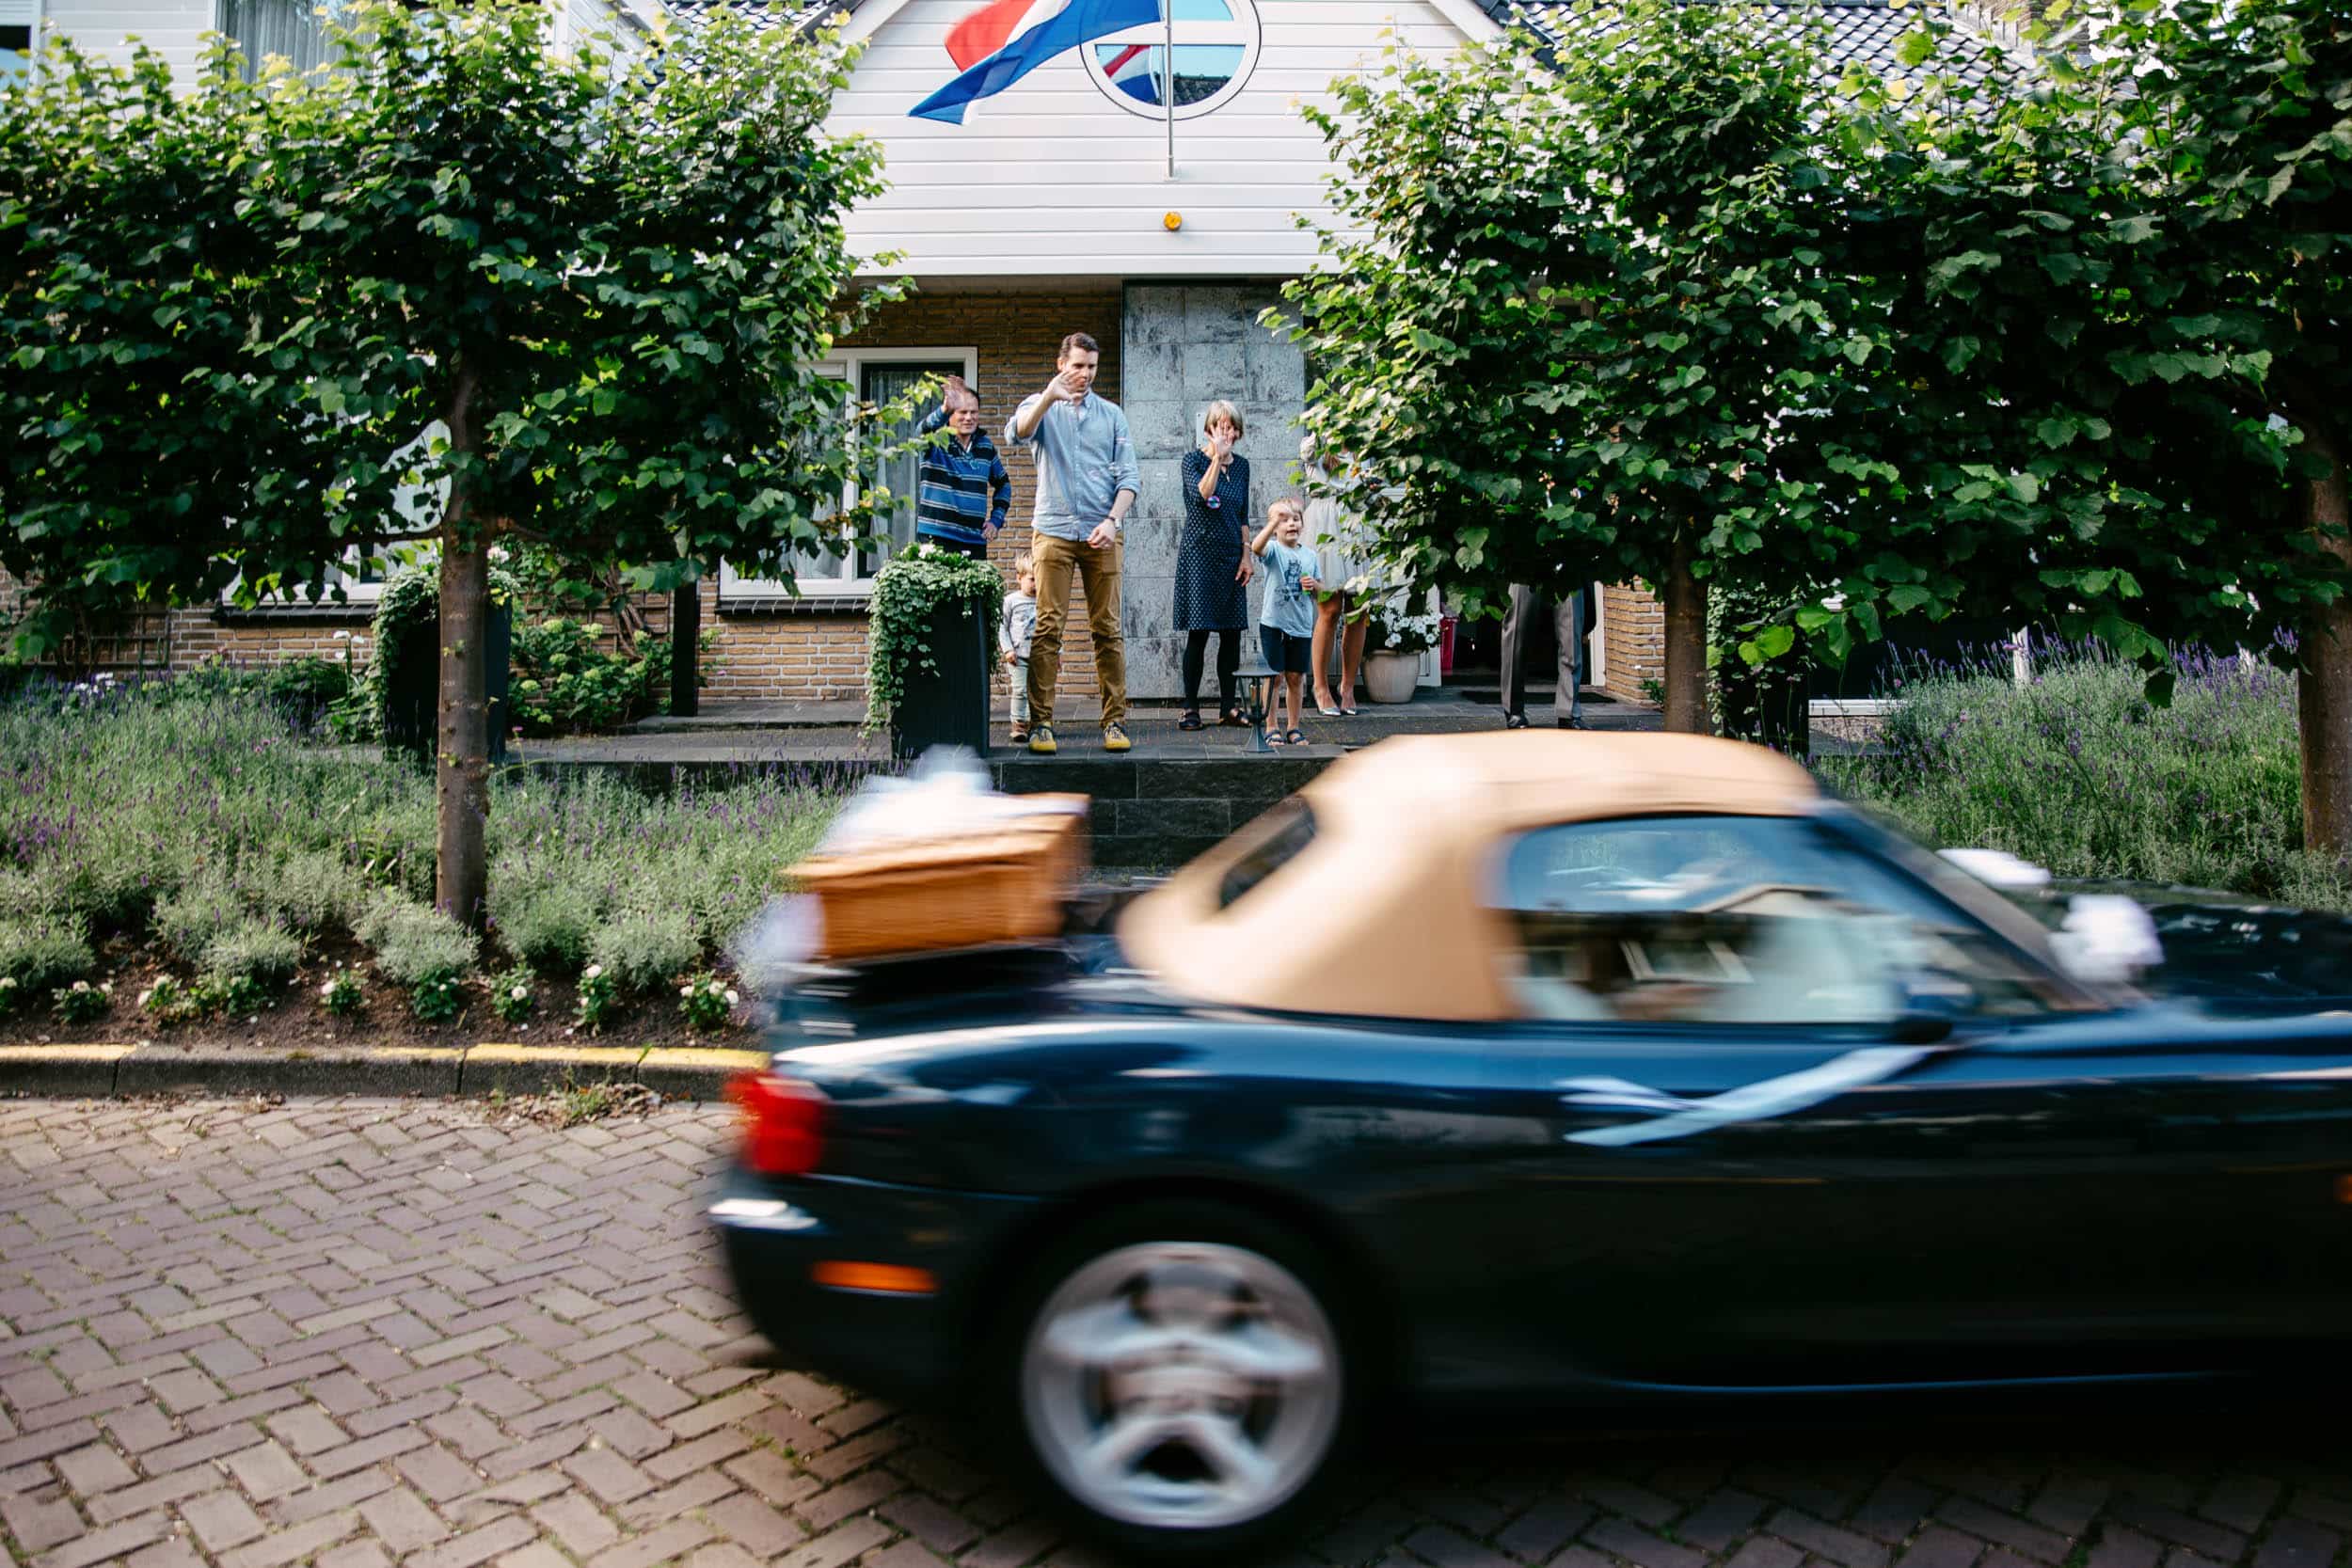 A family drives a sports car in front of a house of their Wedding.